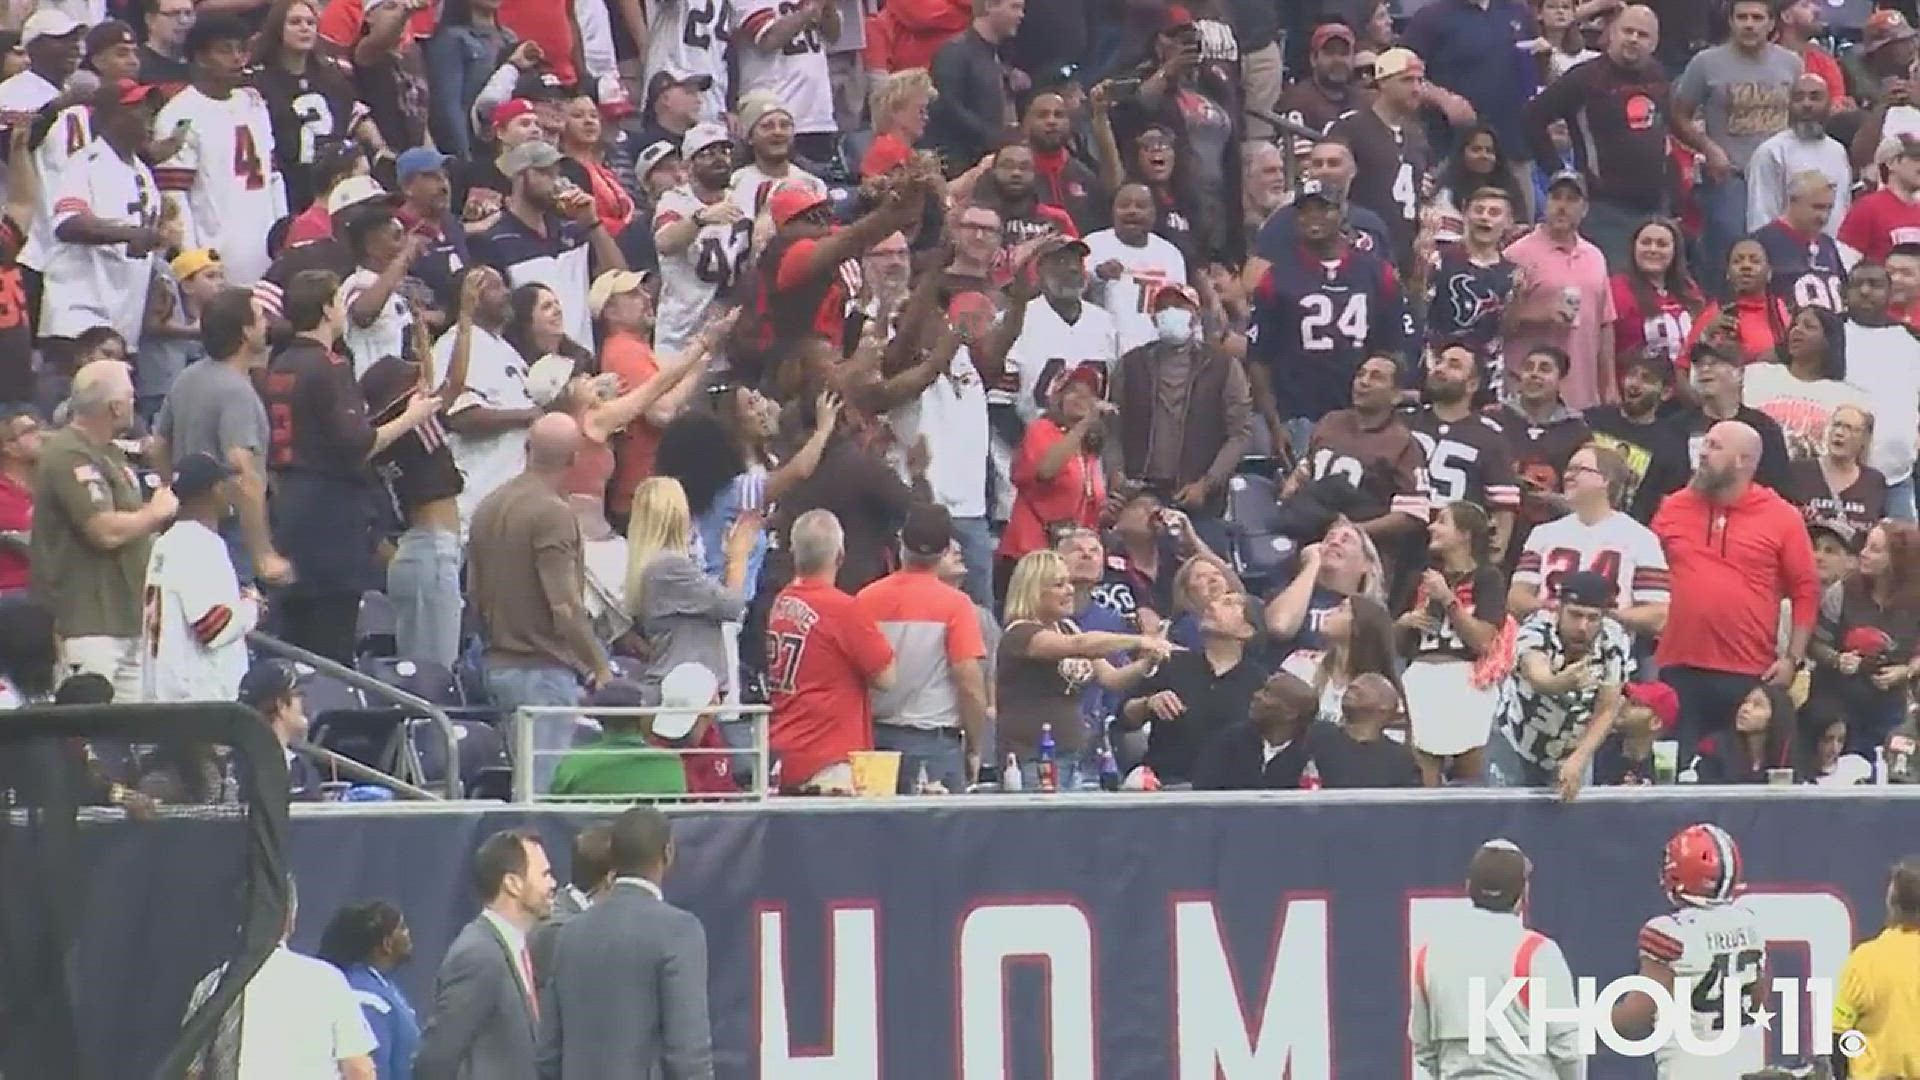 Photojournalist Mike Orta captured video of the fan falling down, then getting back up with the ball.